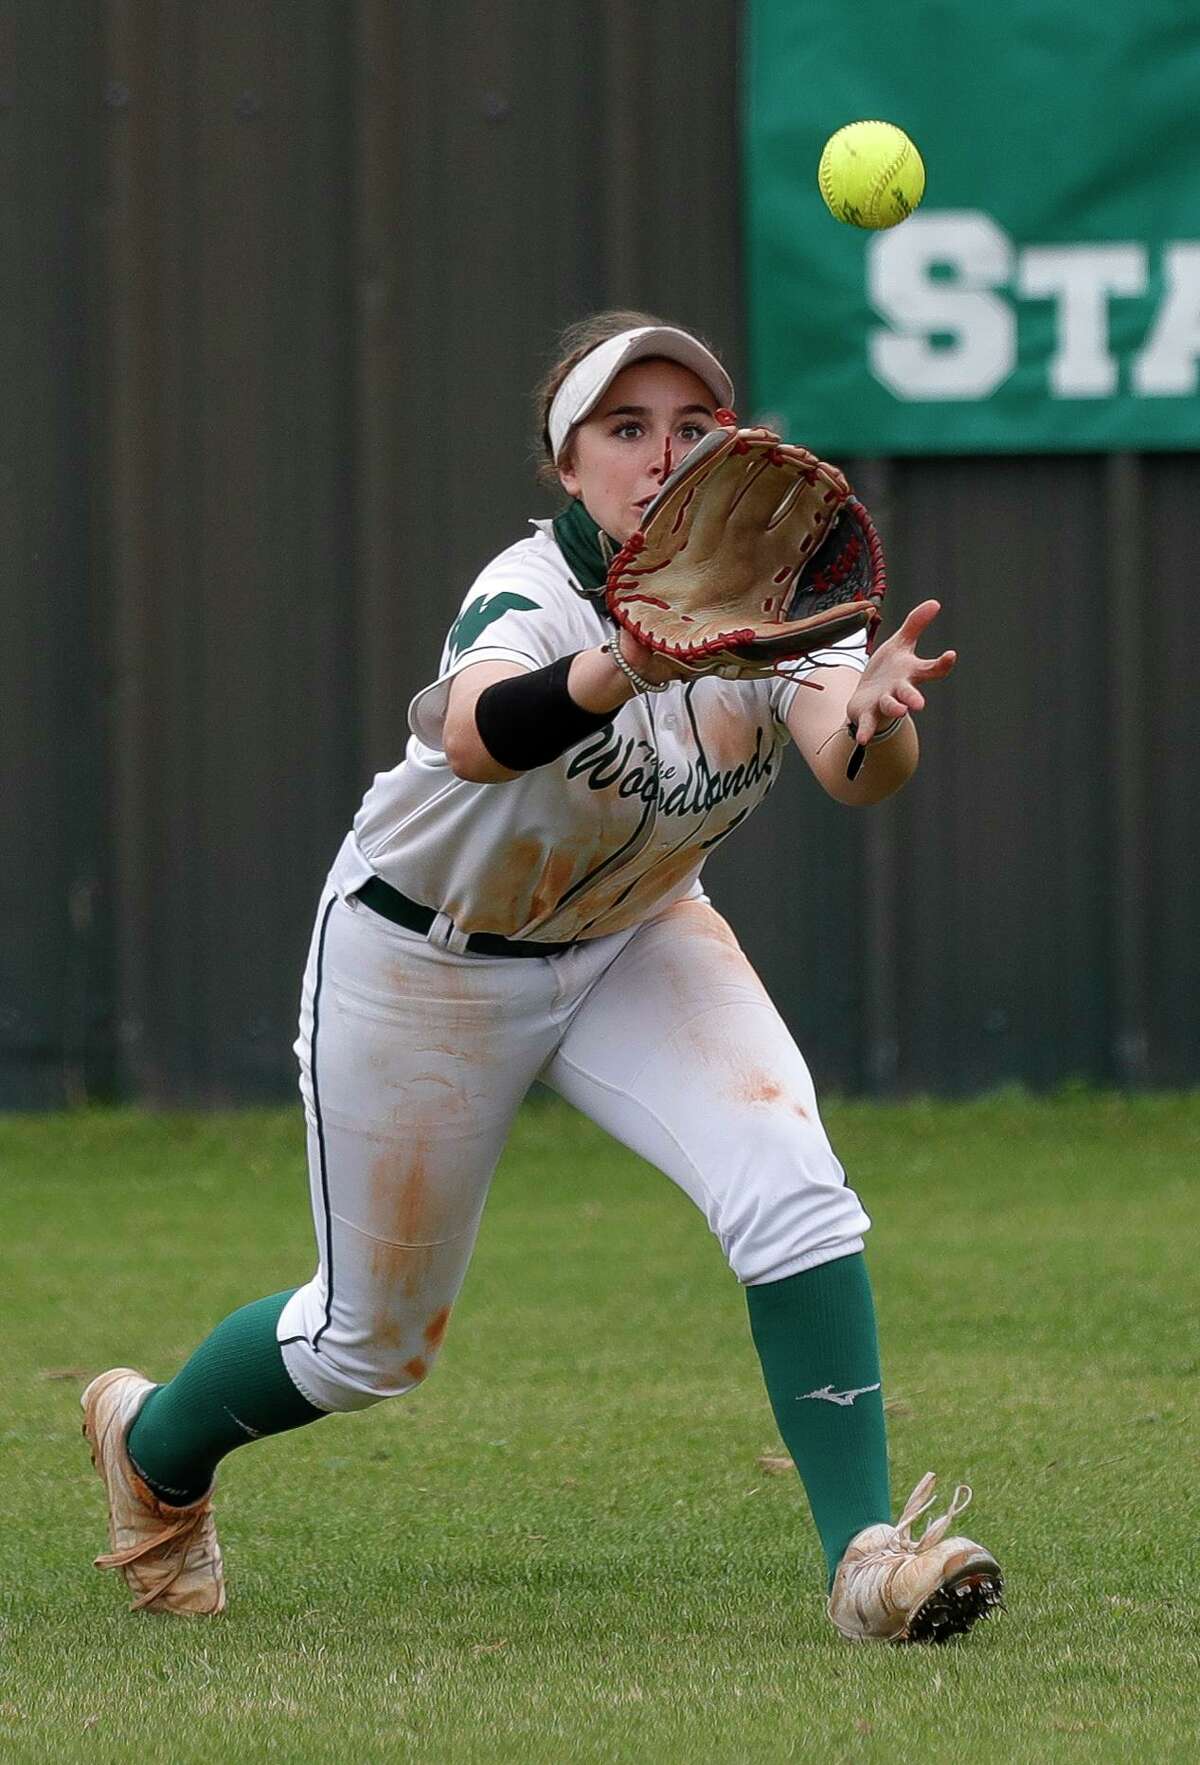 The Woodlands center fielder Gabby Leach (10) field a ball during the first inning of a high school softball game at The Woodlands High School, Saturday, Feb. 27, 2021, in The Woodlands.